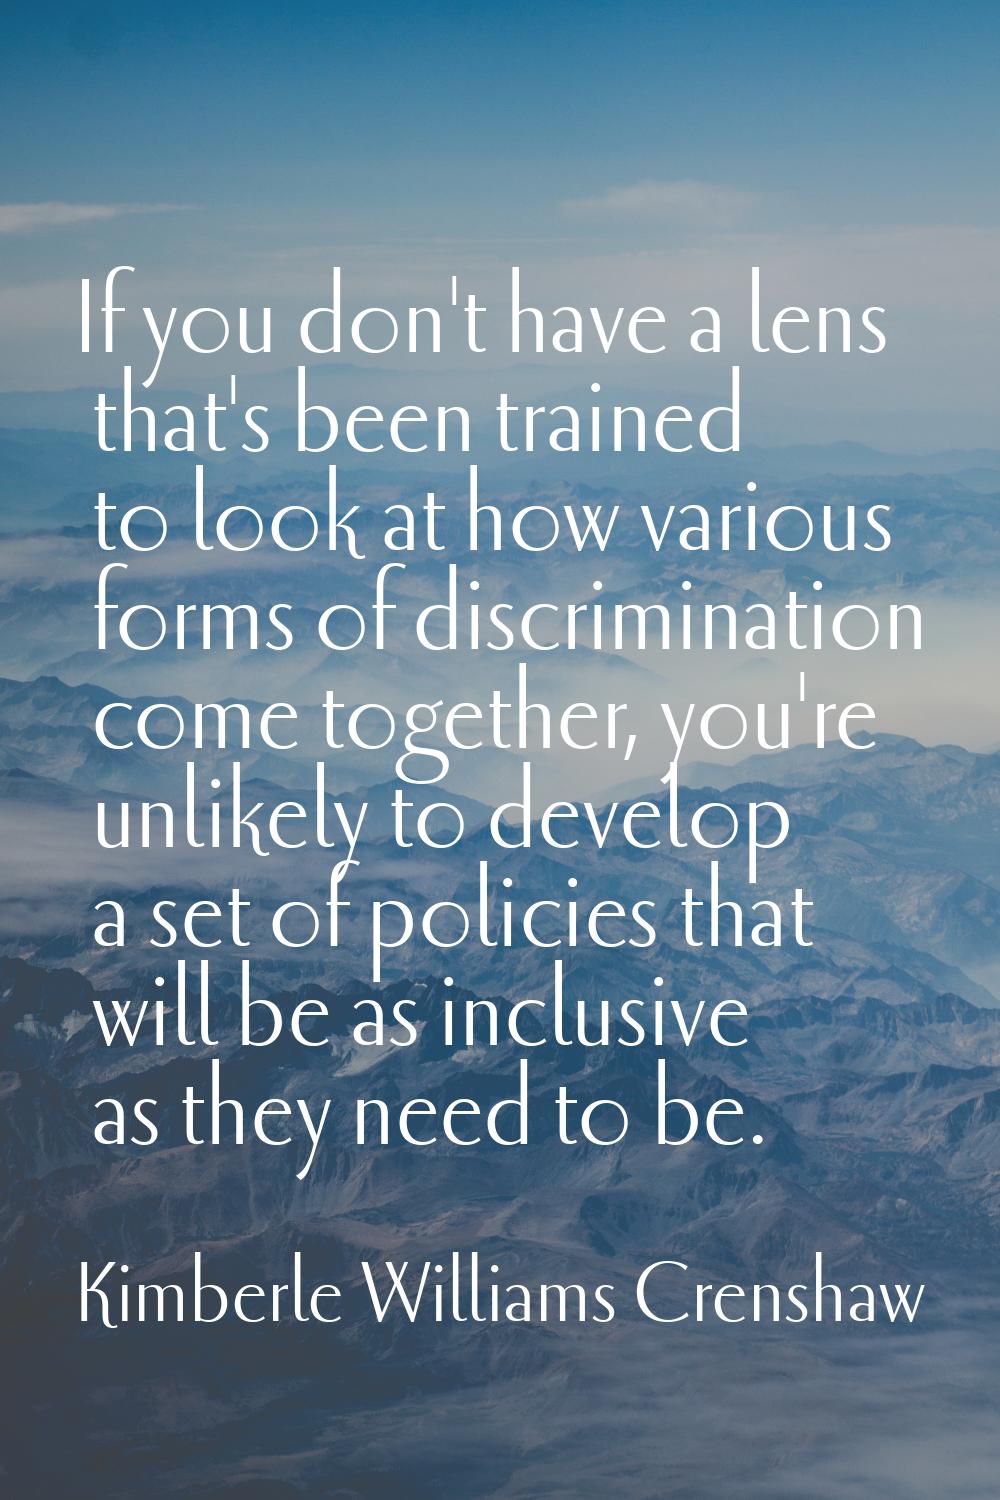 If you don't have a lens that's been trained to look at how various forms of discrimination come to